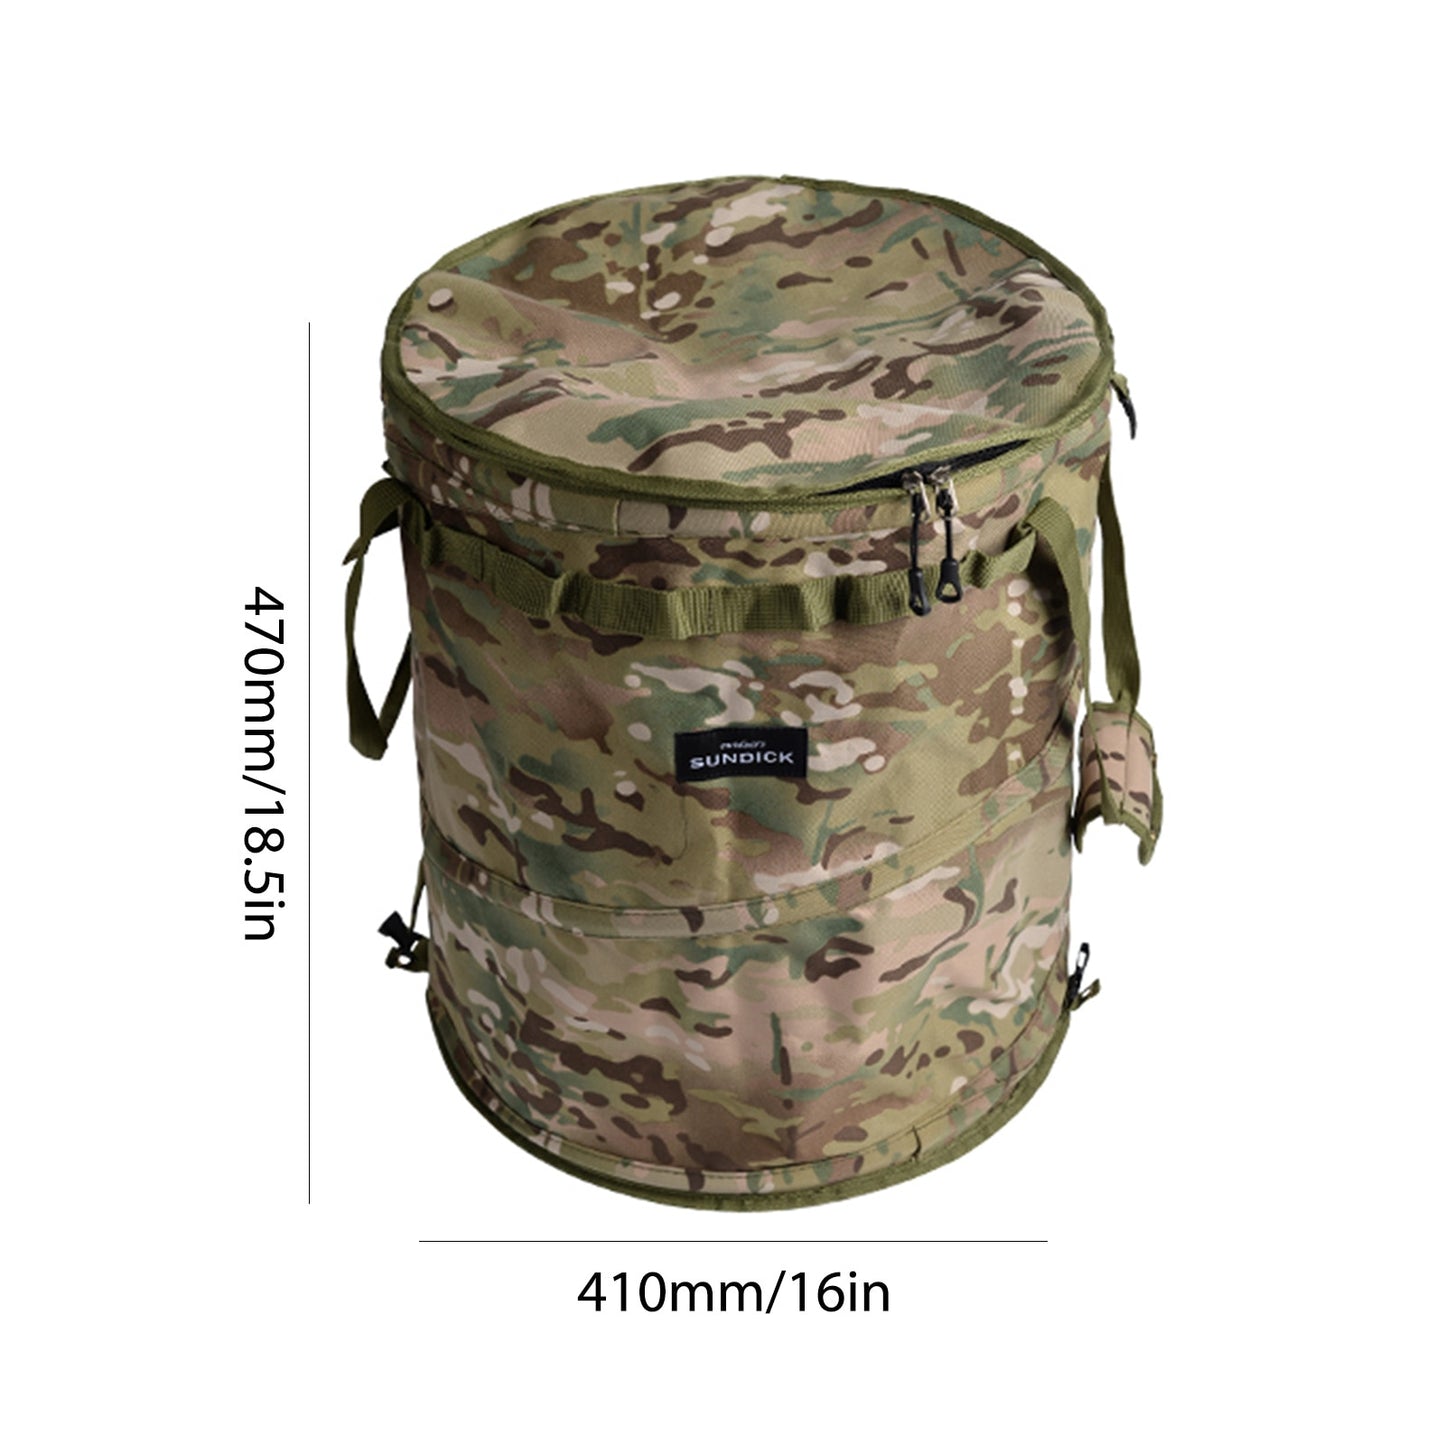 Collapsible / Folding Clothes or Sundry Storage Bag For Camping, Hiking, Fishing, Hunting, or Travel